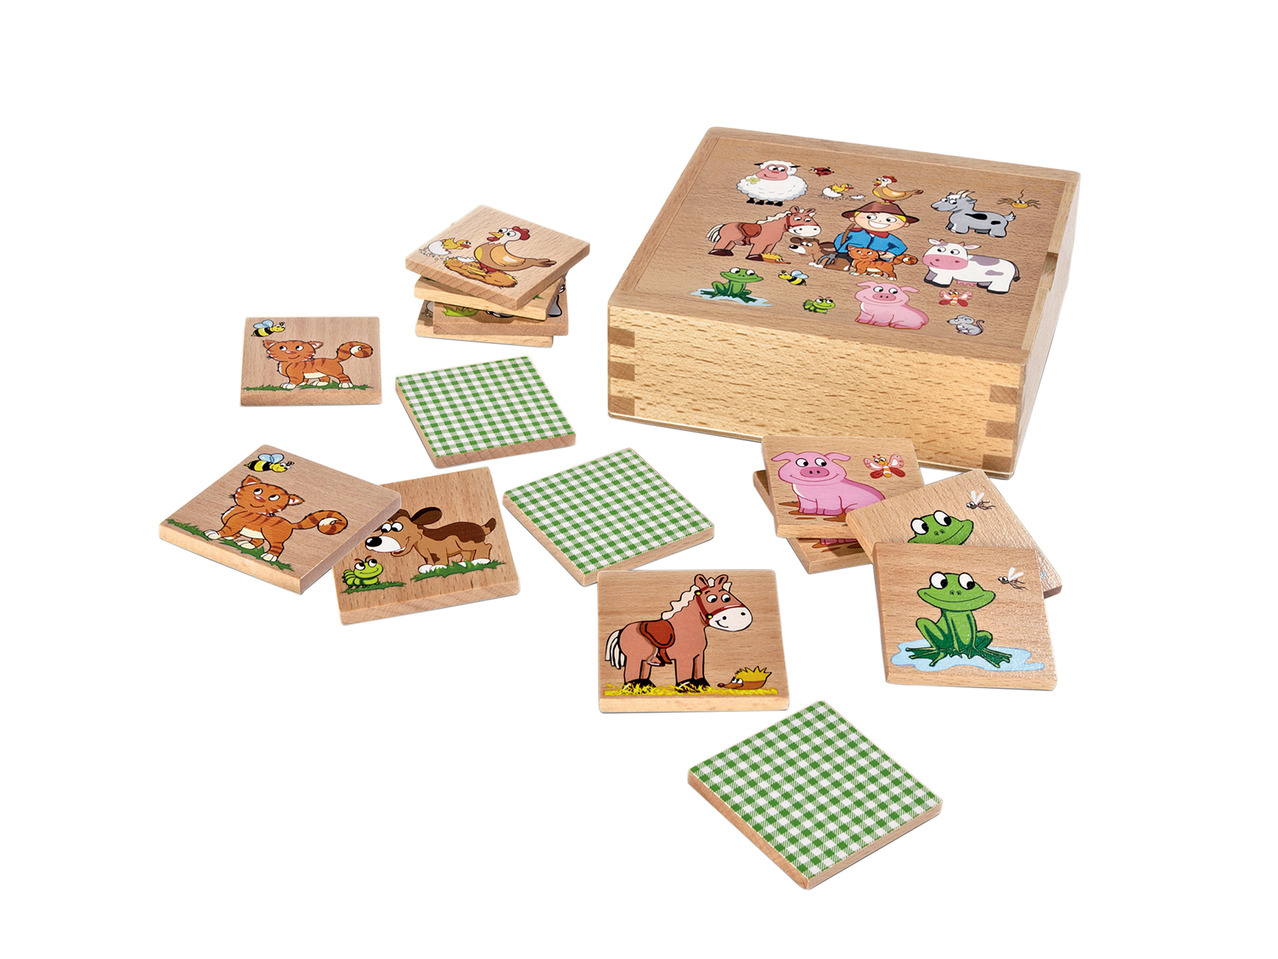 Playtive Junior Wooden Learning Puzzle or Wooden Games1